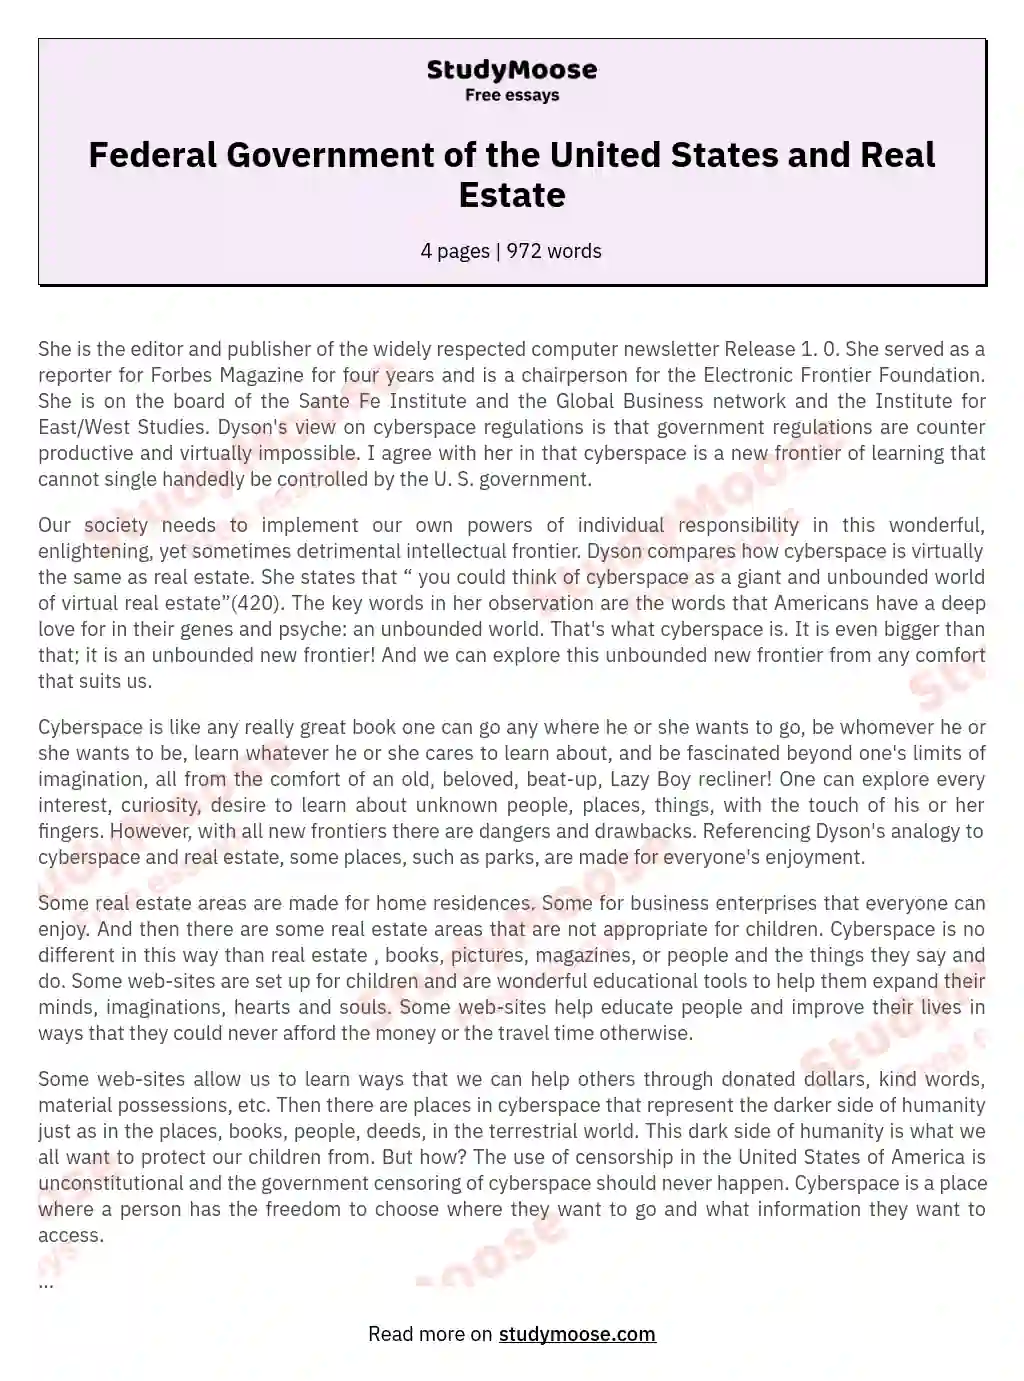 Federal Government of the United States and Real Estate essay